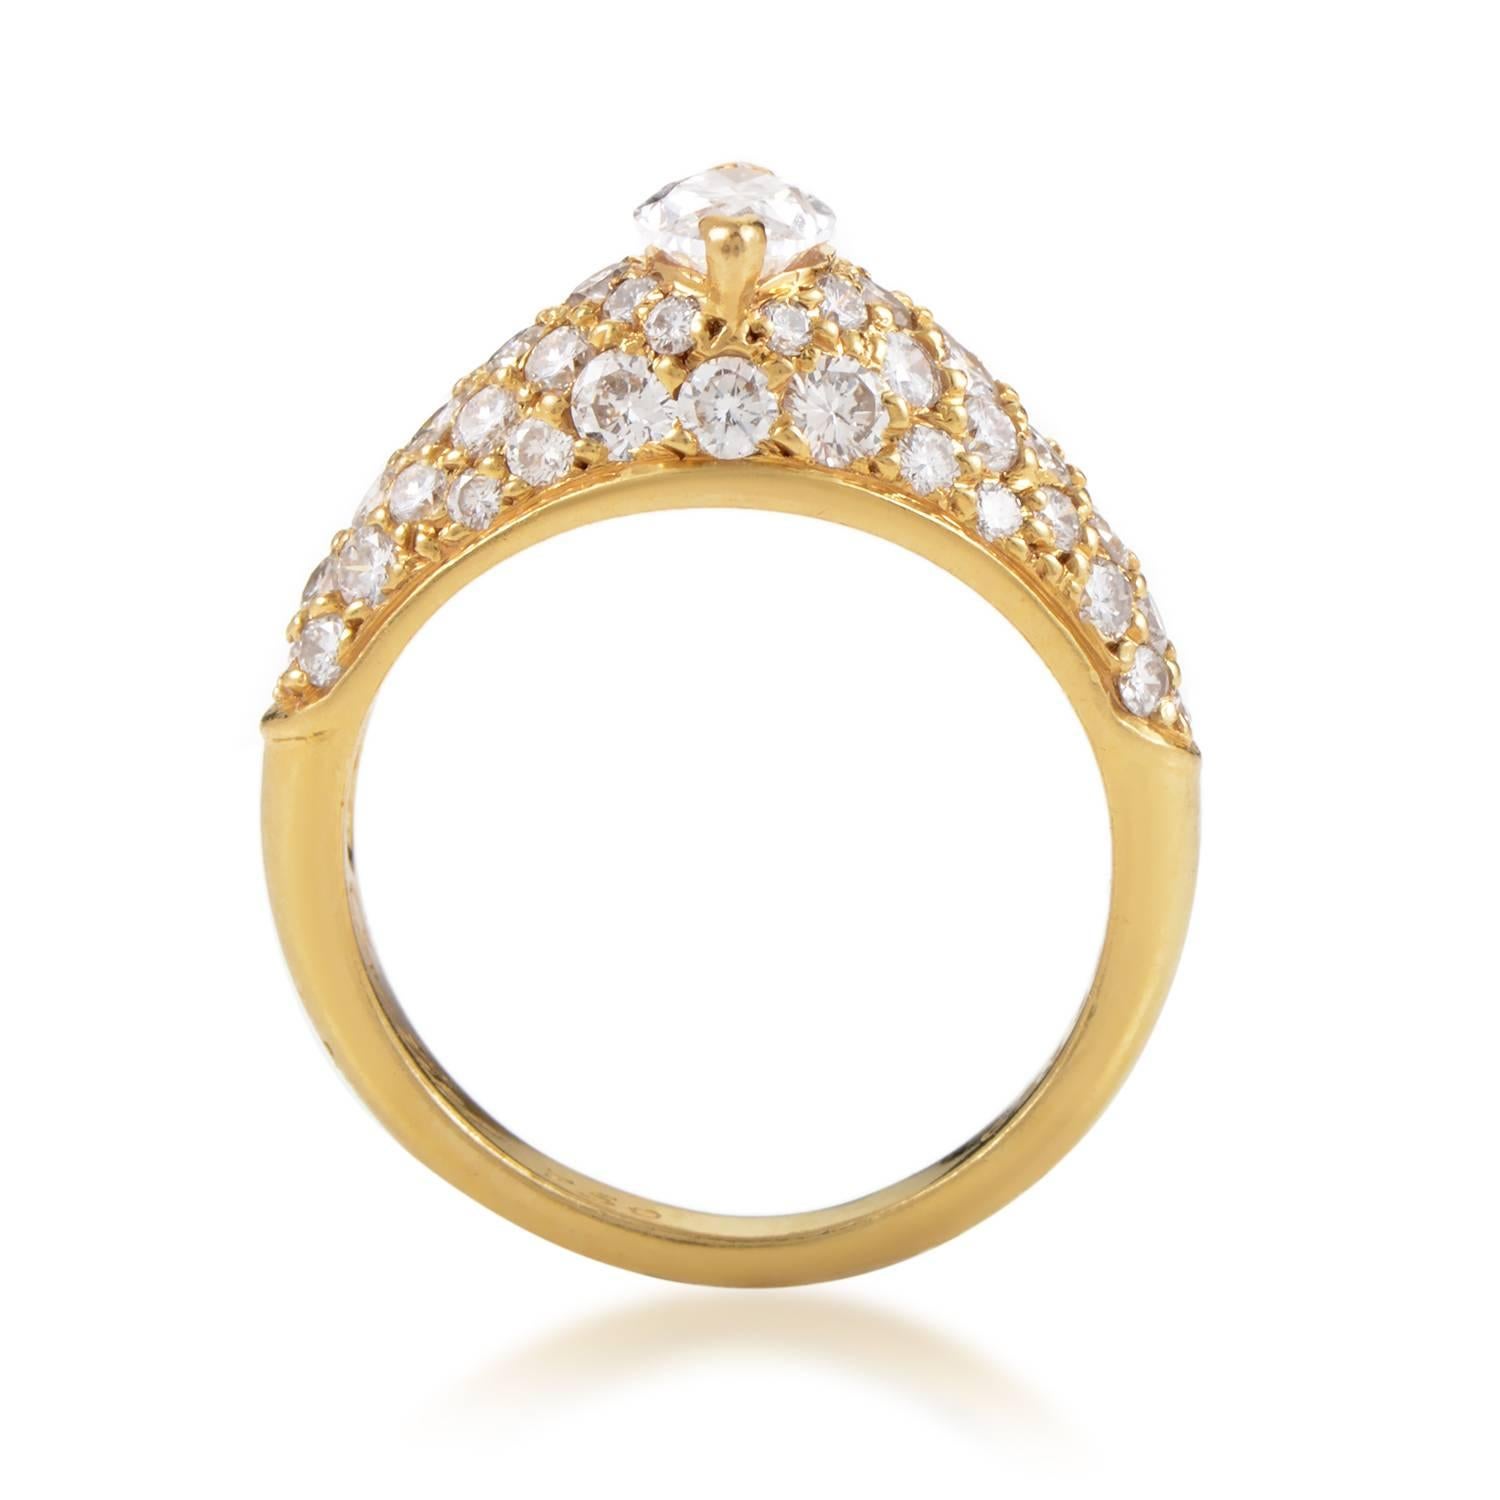 Leading up to the stunning central G-color diamond of VS quality weighing 0.60ct, lustrous smaller diamonds totaling 1.25 carats are arranged neatly upon the fabulously radiant 18K yellow gold in this gorgeous ring from Cartier.
Ring Size: 4.75
Band